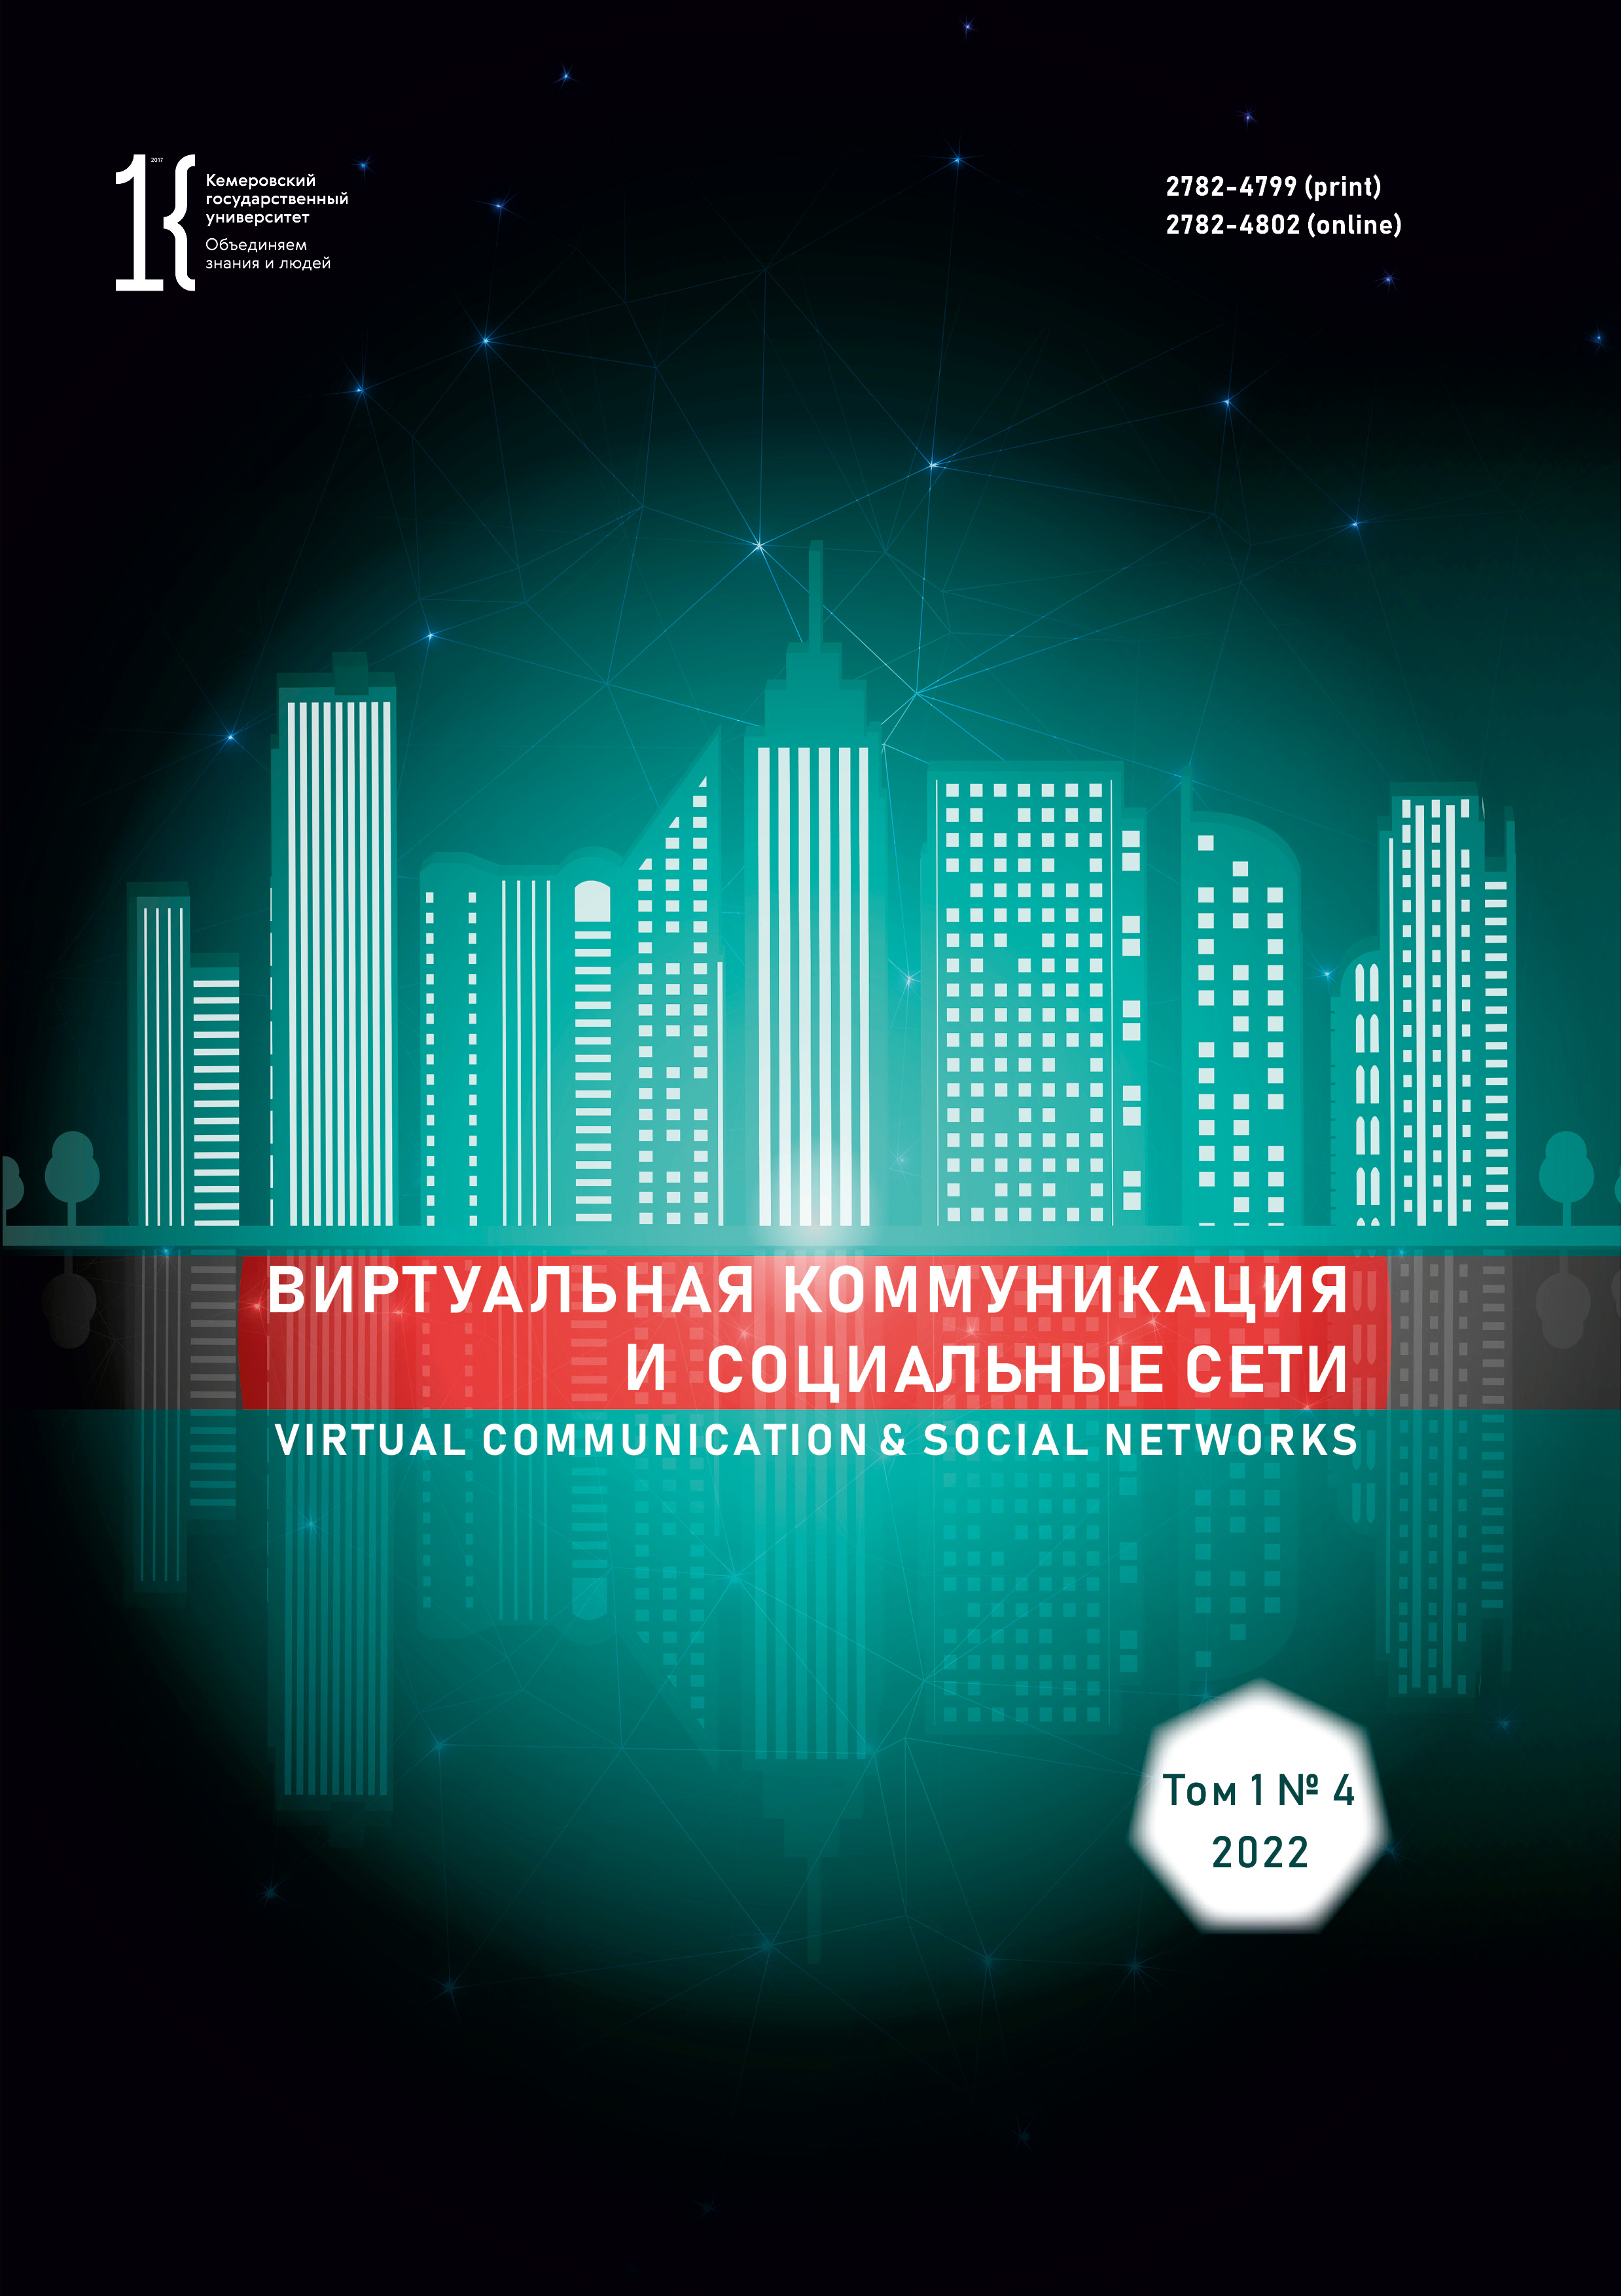                         Corporate Website as a Means of Image Cultivation:  The Case of the Zhorin and Partners Bar Association, Moscow
            